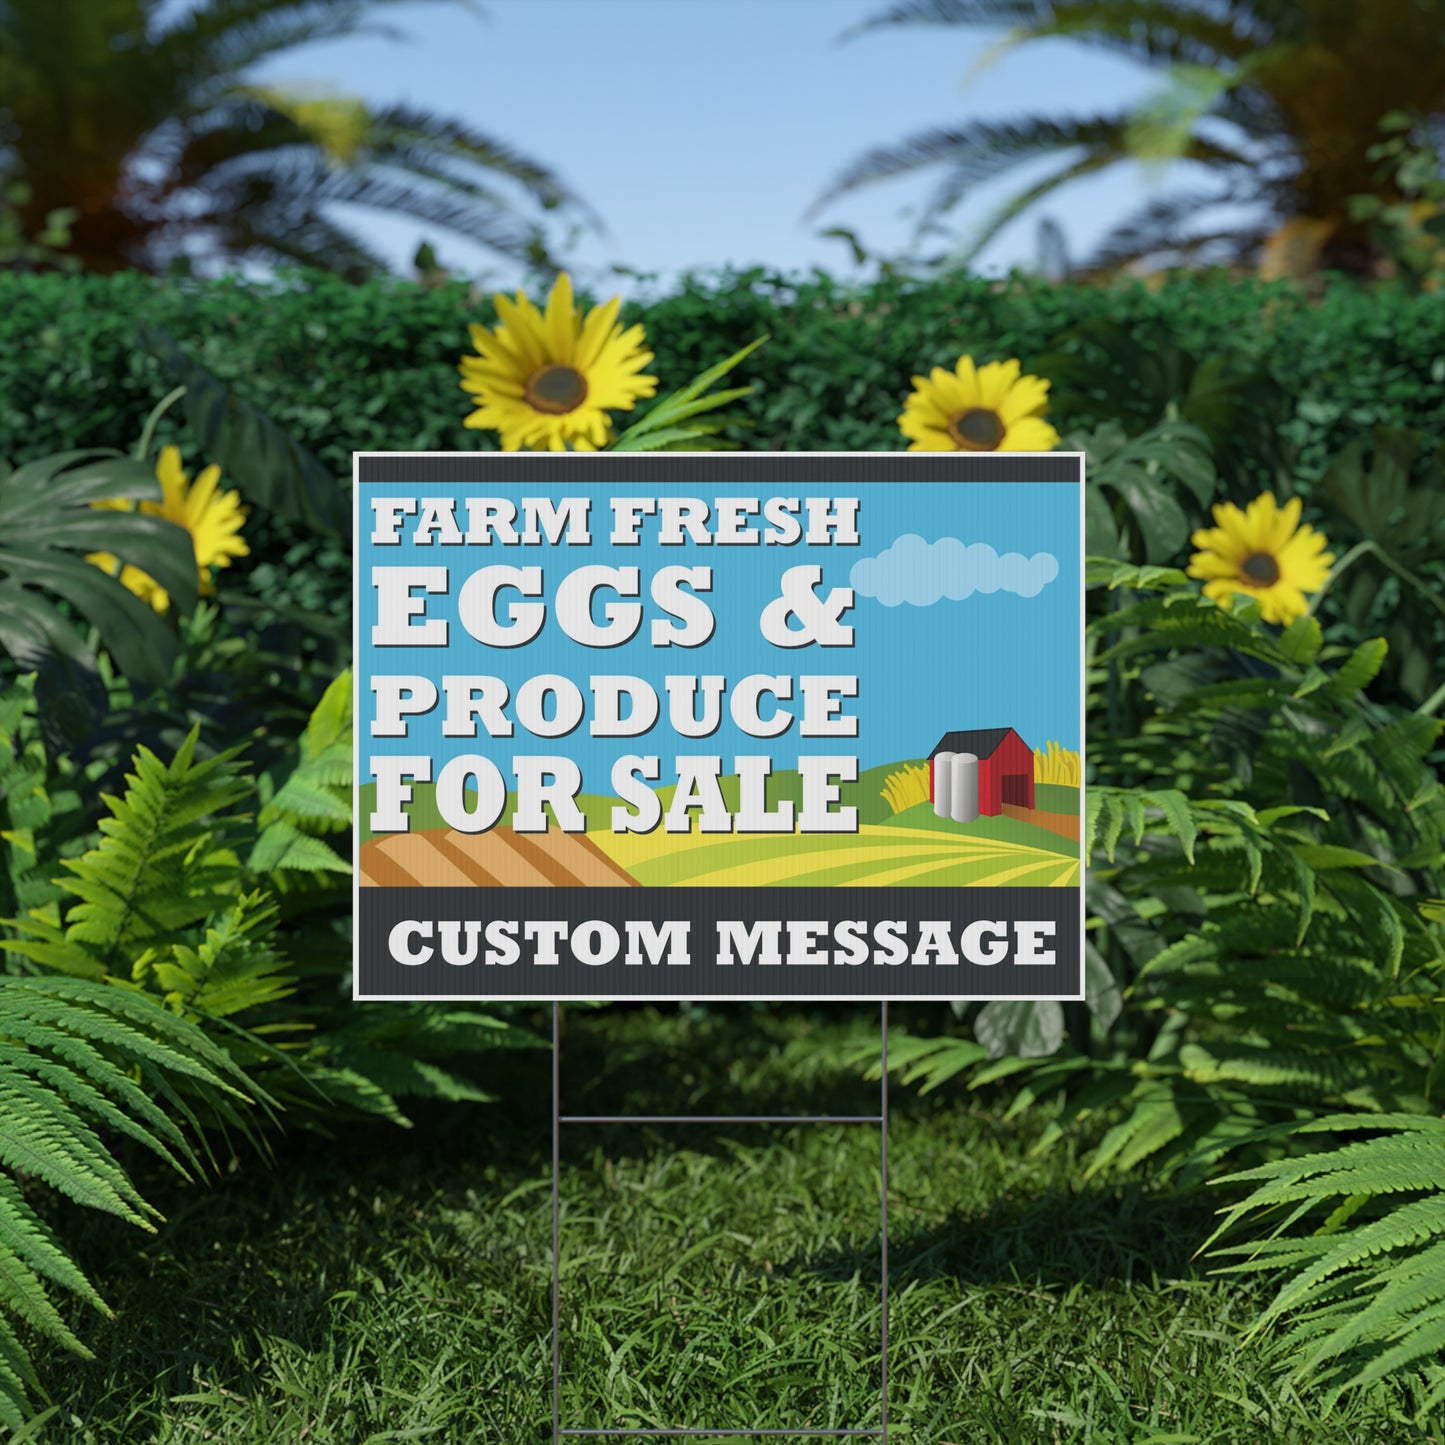 Farm Fresh Eggs And Produce For Sale Yard Sign, Custom, Personalize, 18 x 24-inch, Metal H-Stake Included